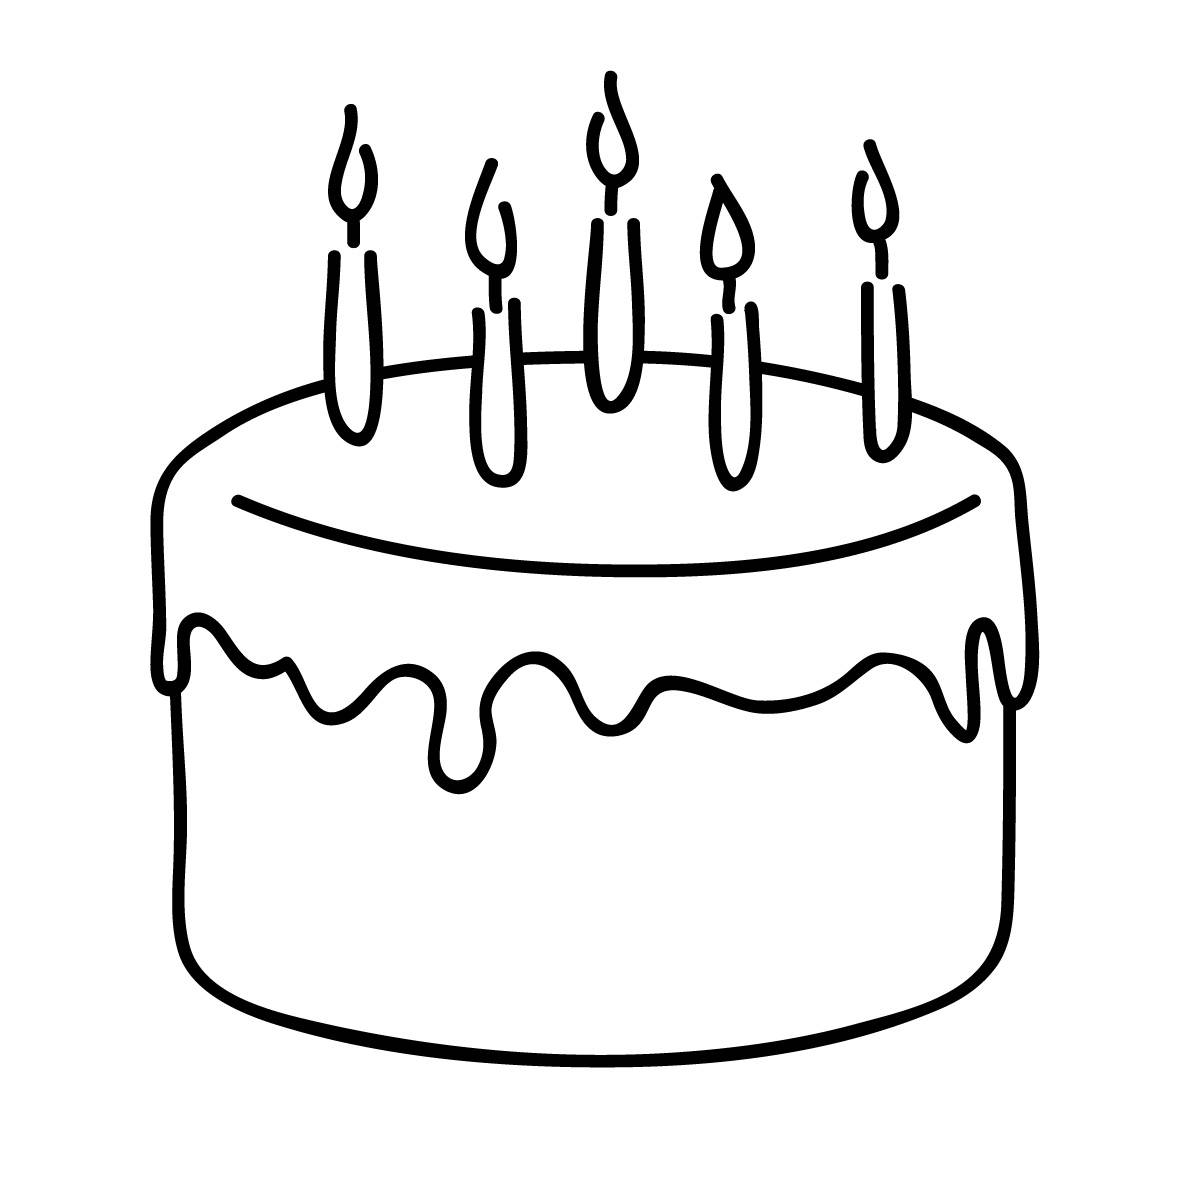 Cakes PNG Black And White - 149684